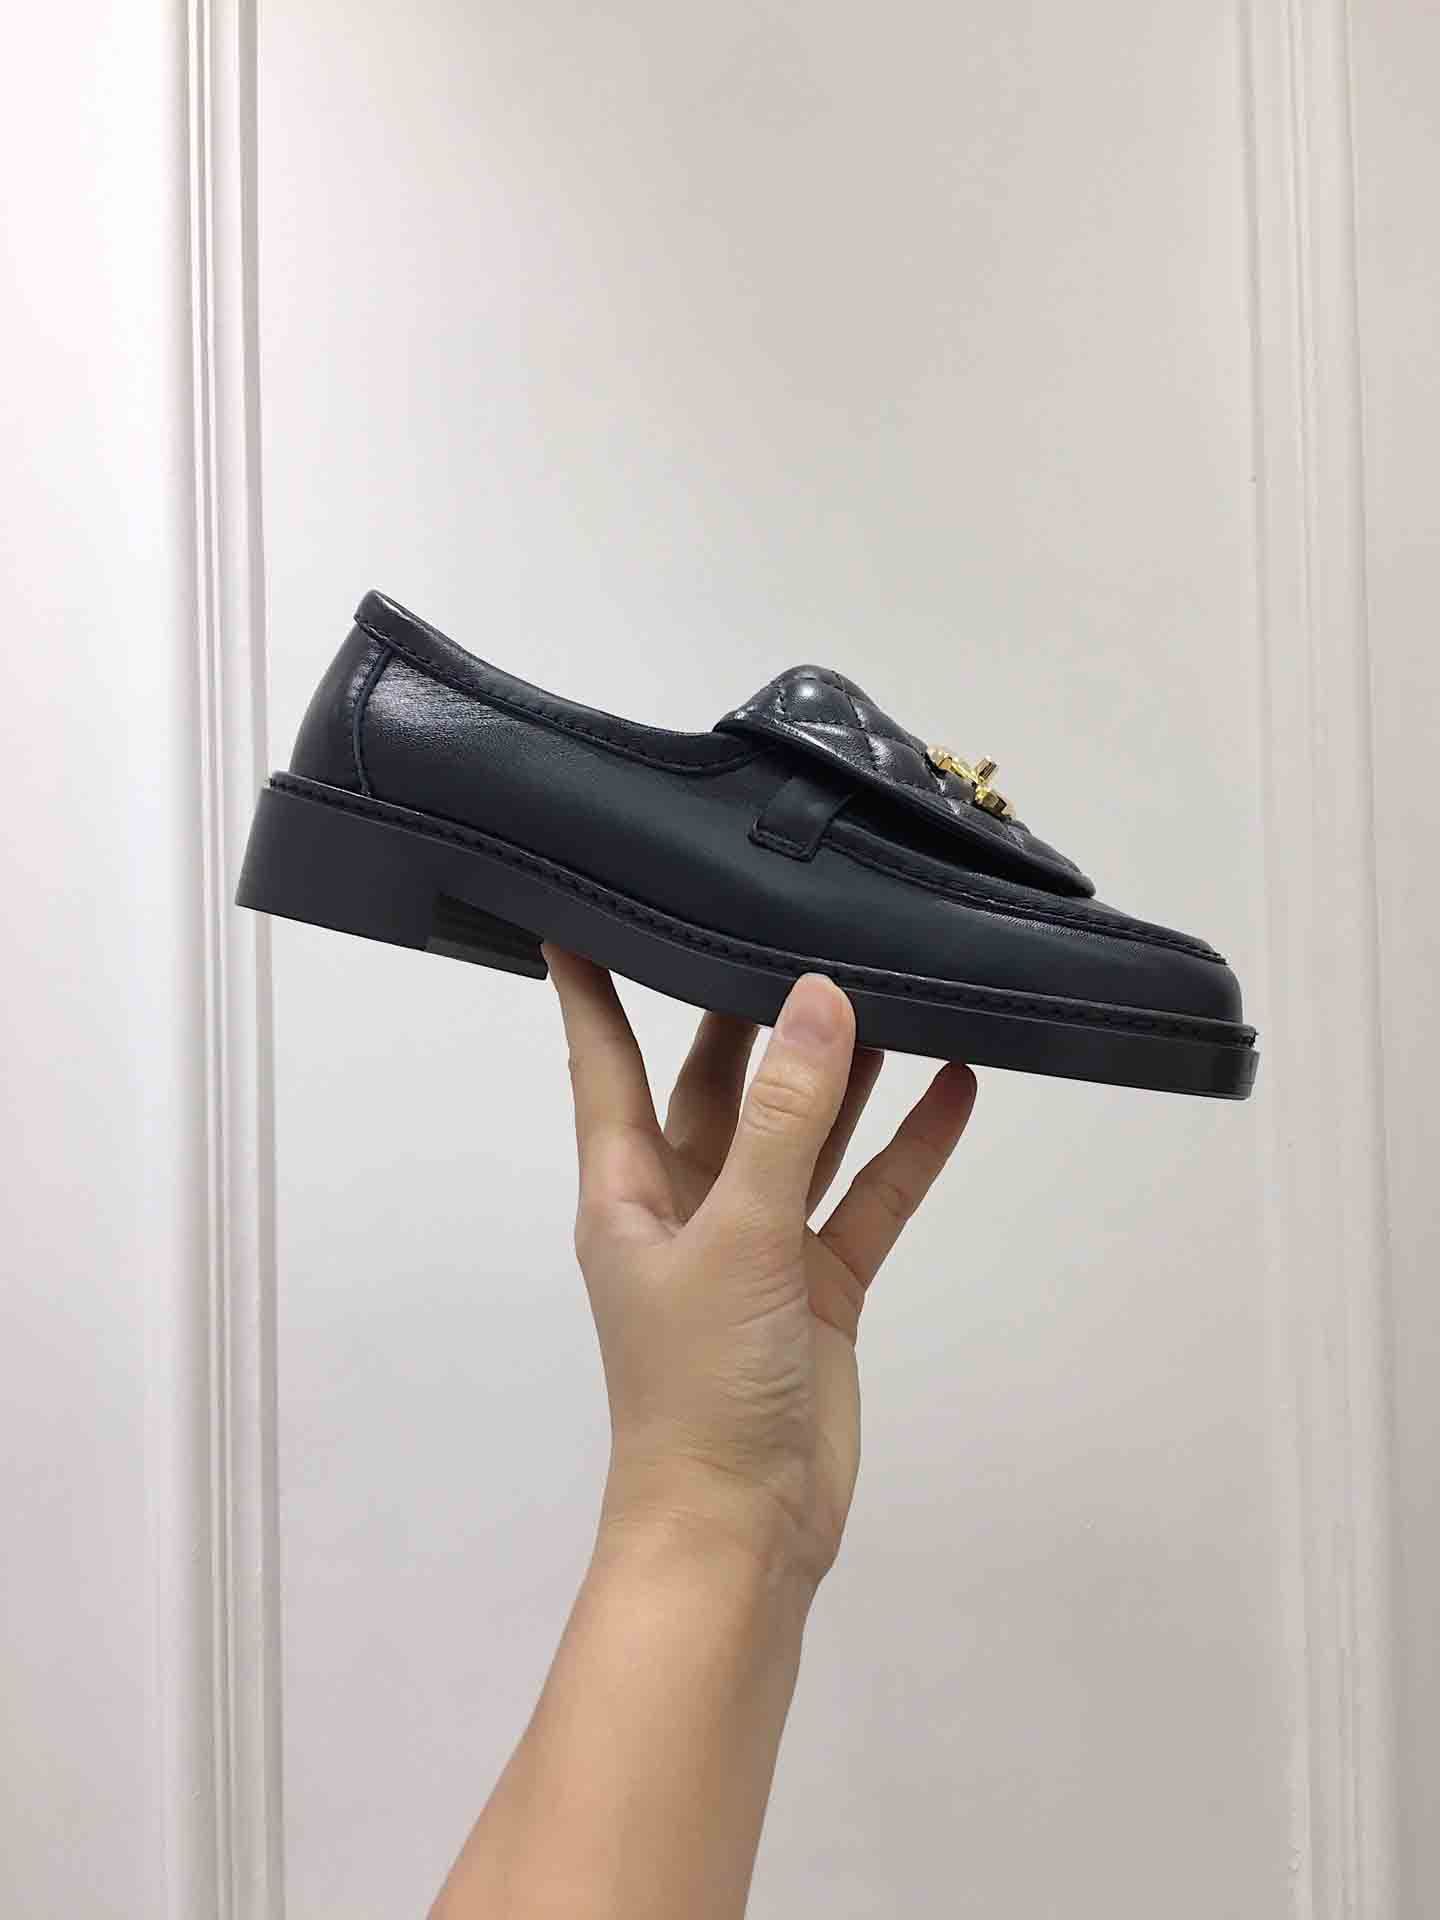 2021 New Good Quality Designer Loafers Spring New Designer Fashion Loafer  Shoes Spring Luxury Casual Shoes From Yangyang2019, $115.58